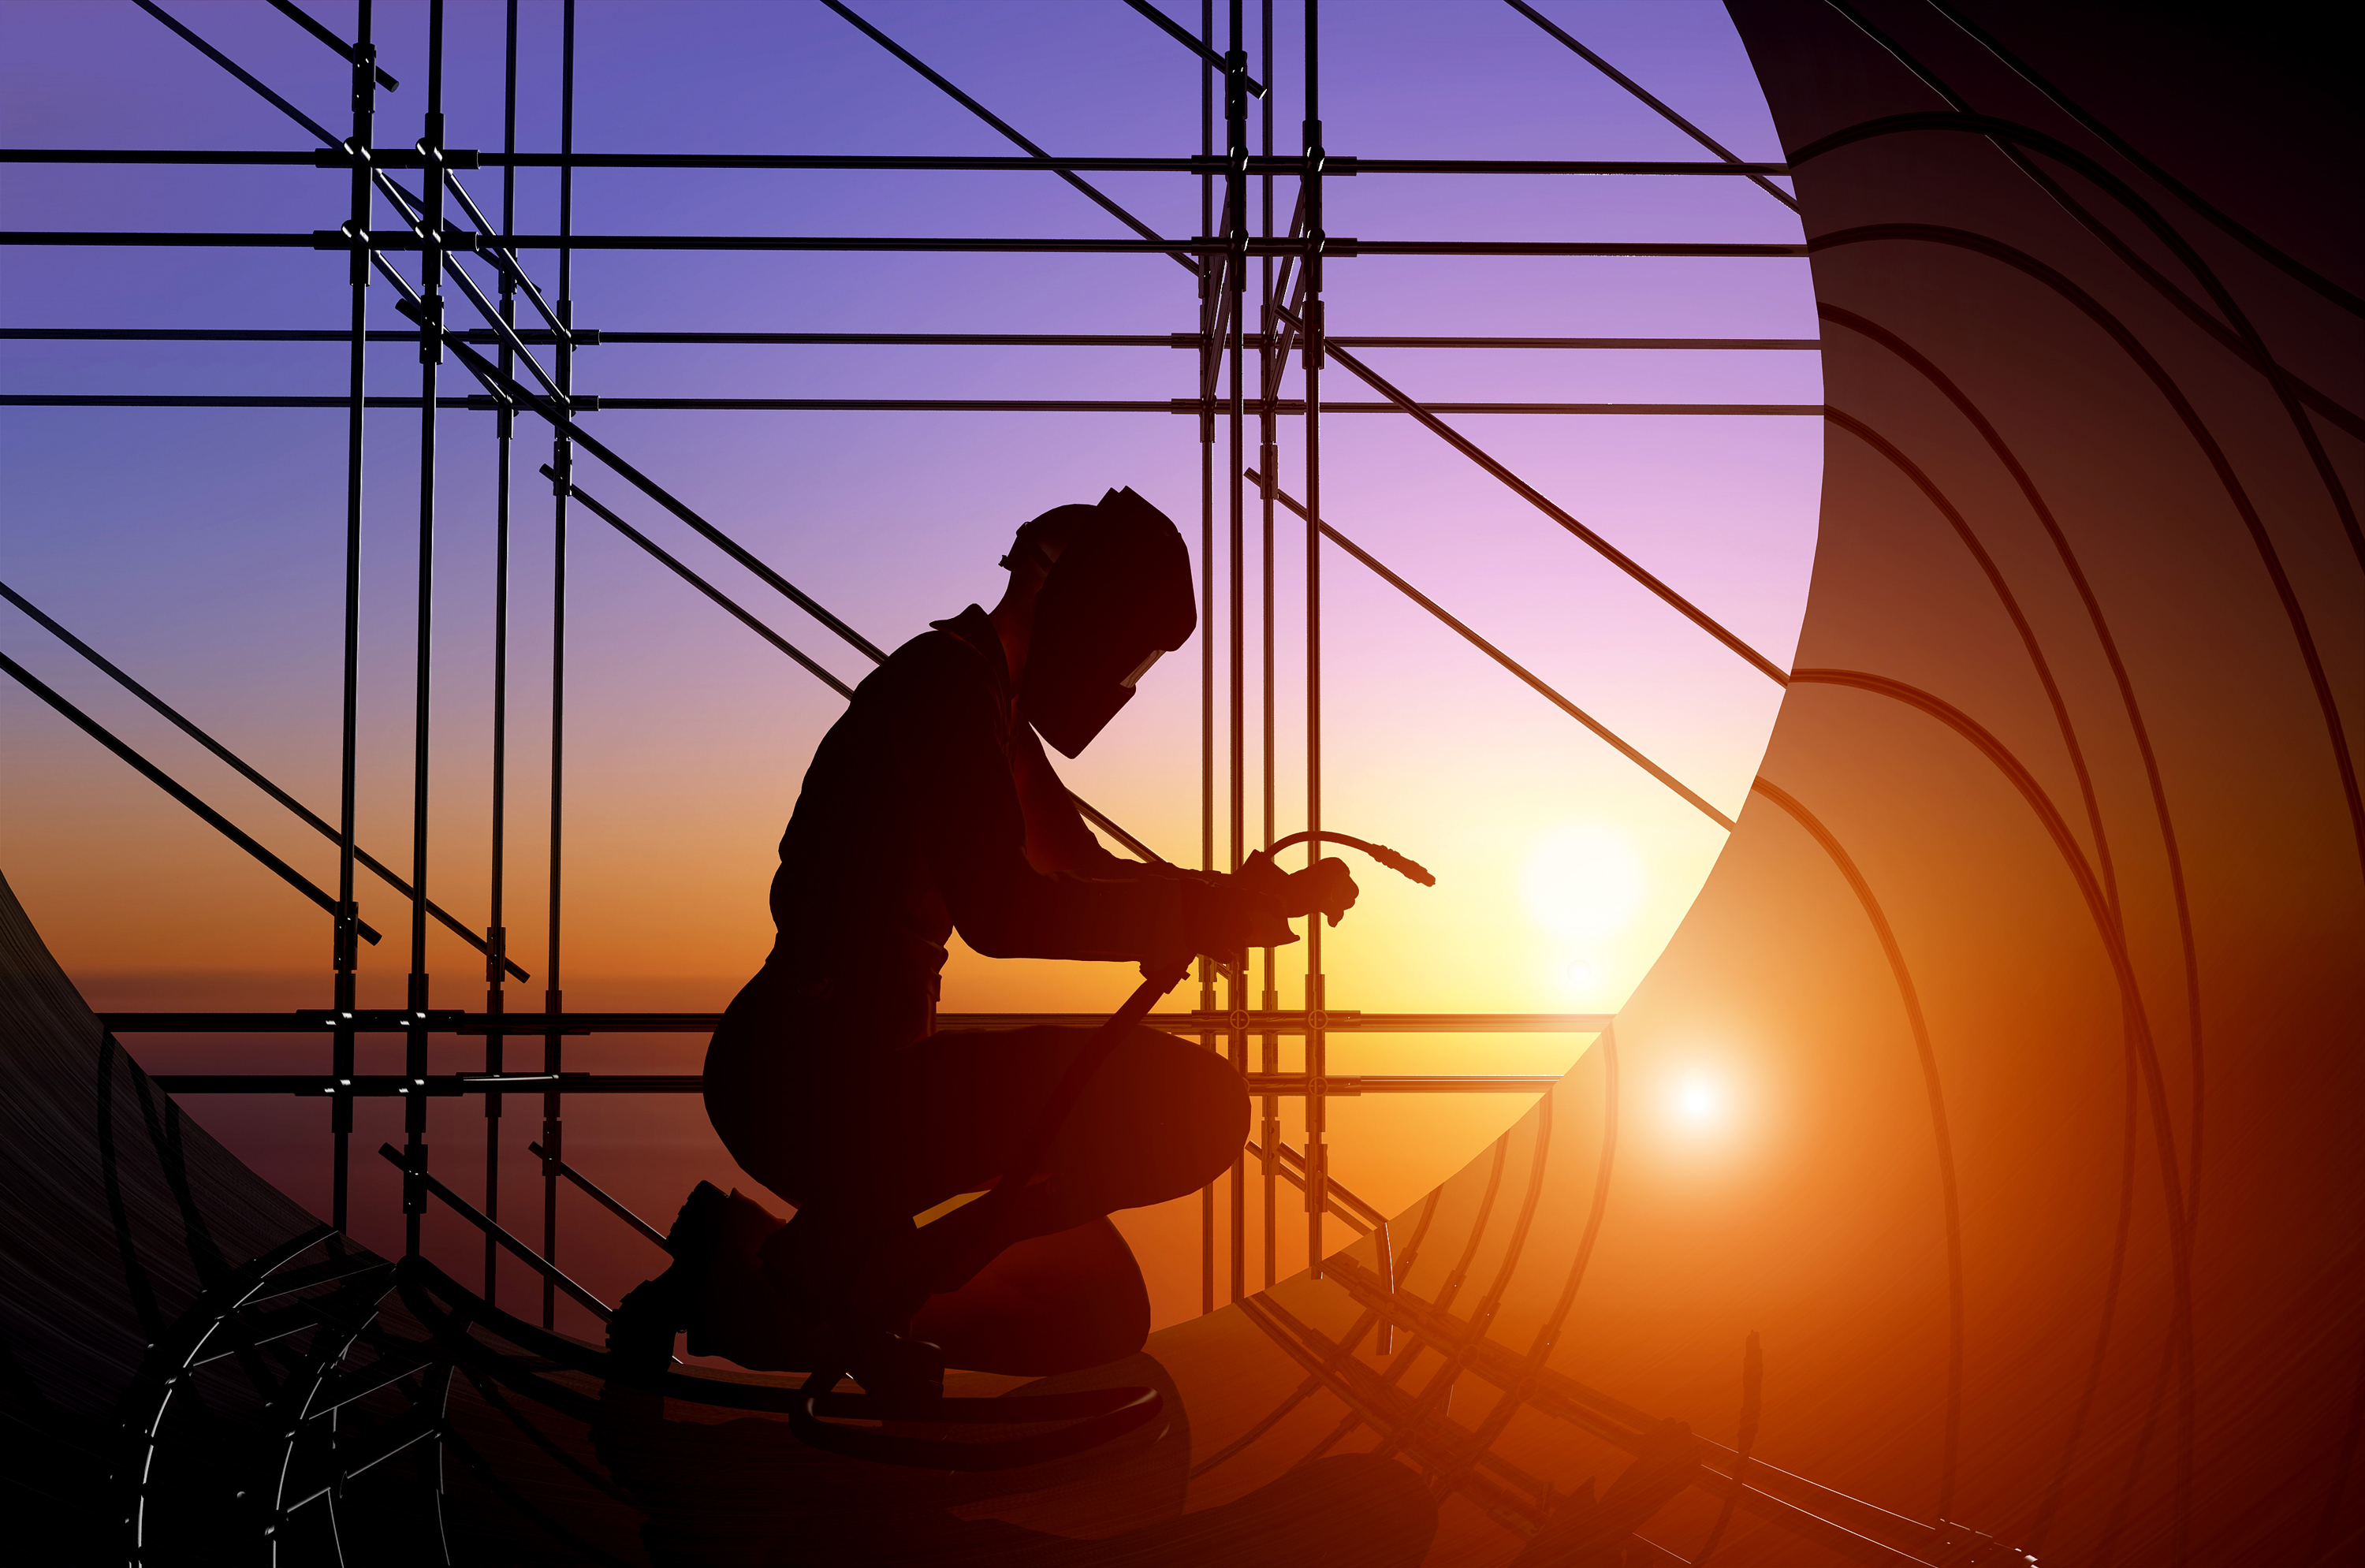 Silhouette of a welder working on site with a sunset in the background